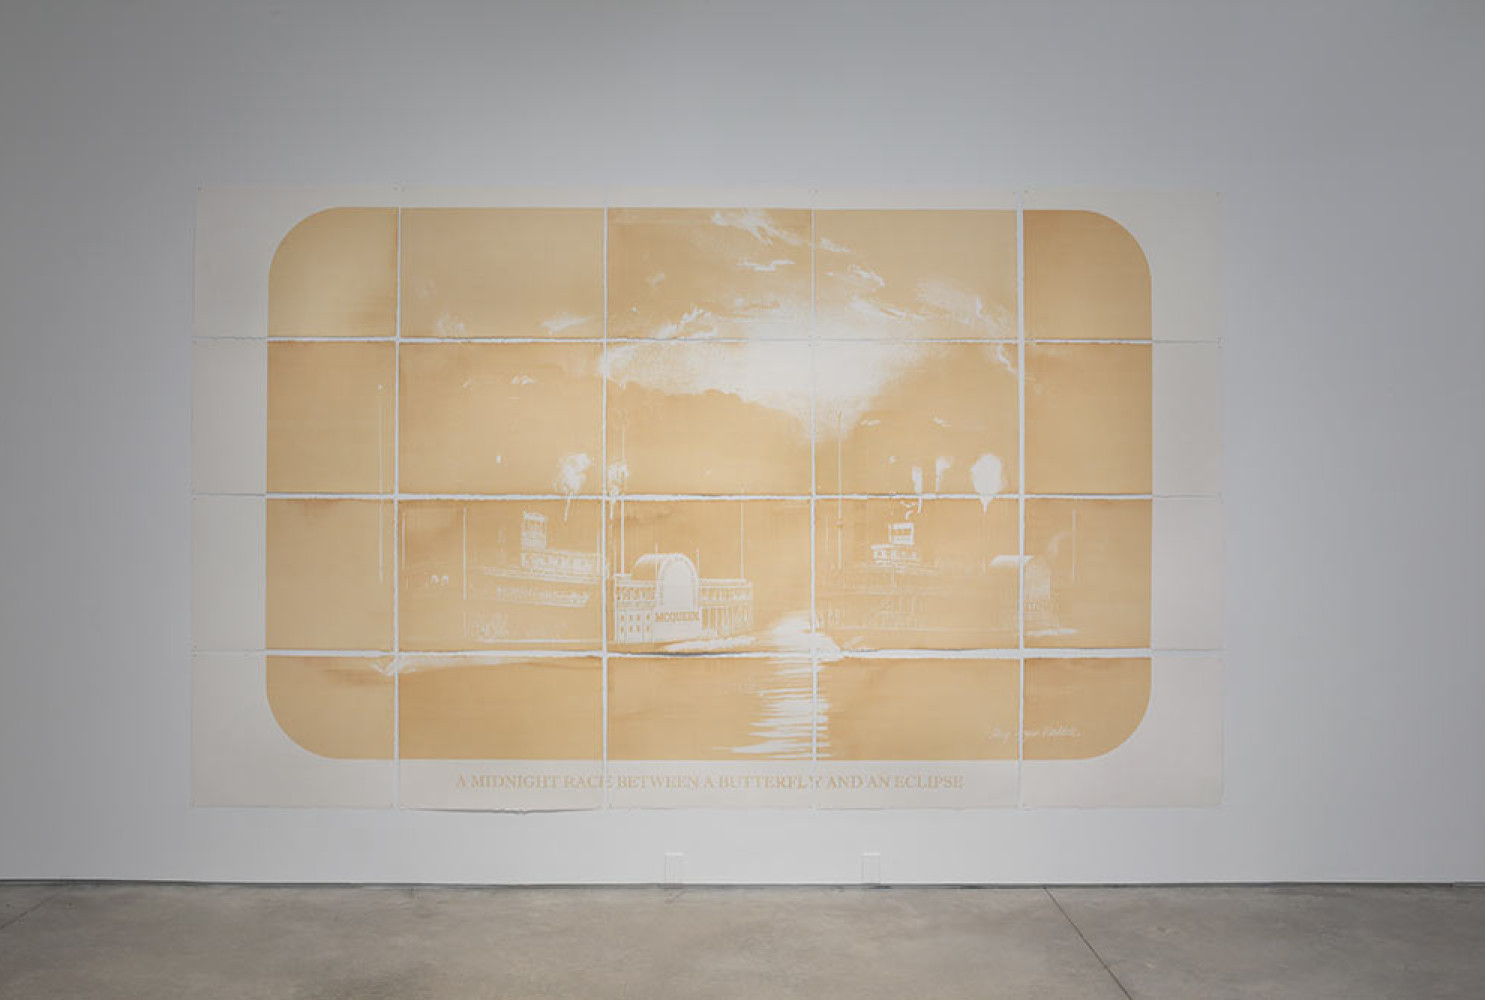 A Midnight Race Between A Butterfly And An Eclipse, installation view, Epitaph for a Darling Lady, Visual Arts Center of Richmond, VA, 2015. Laser burned paper, unique state print; 88 x 150 inches; Edition of 3. Courtesy of the artist.